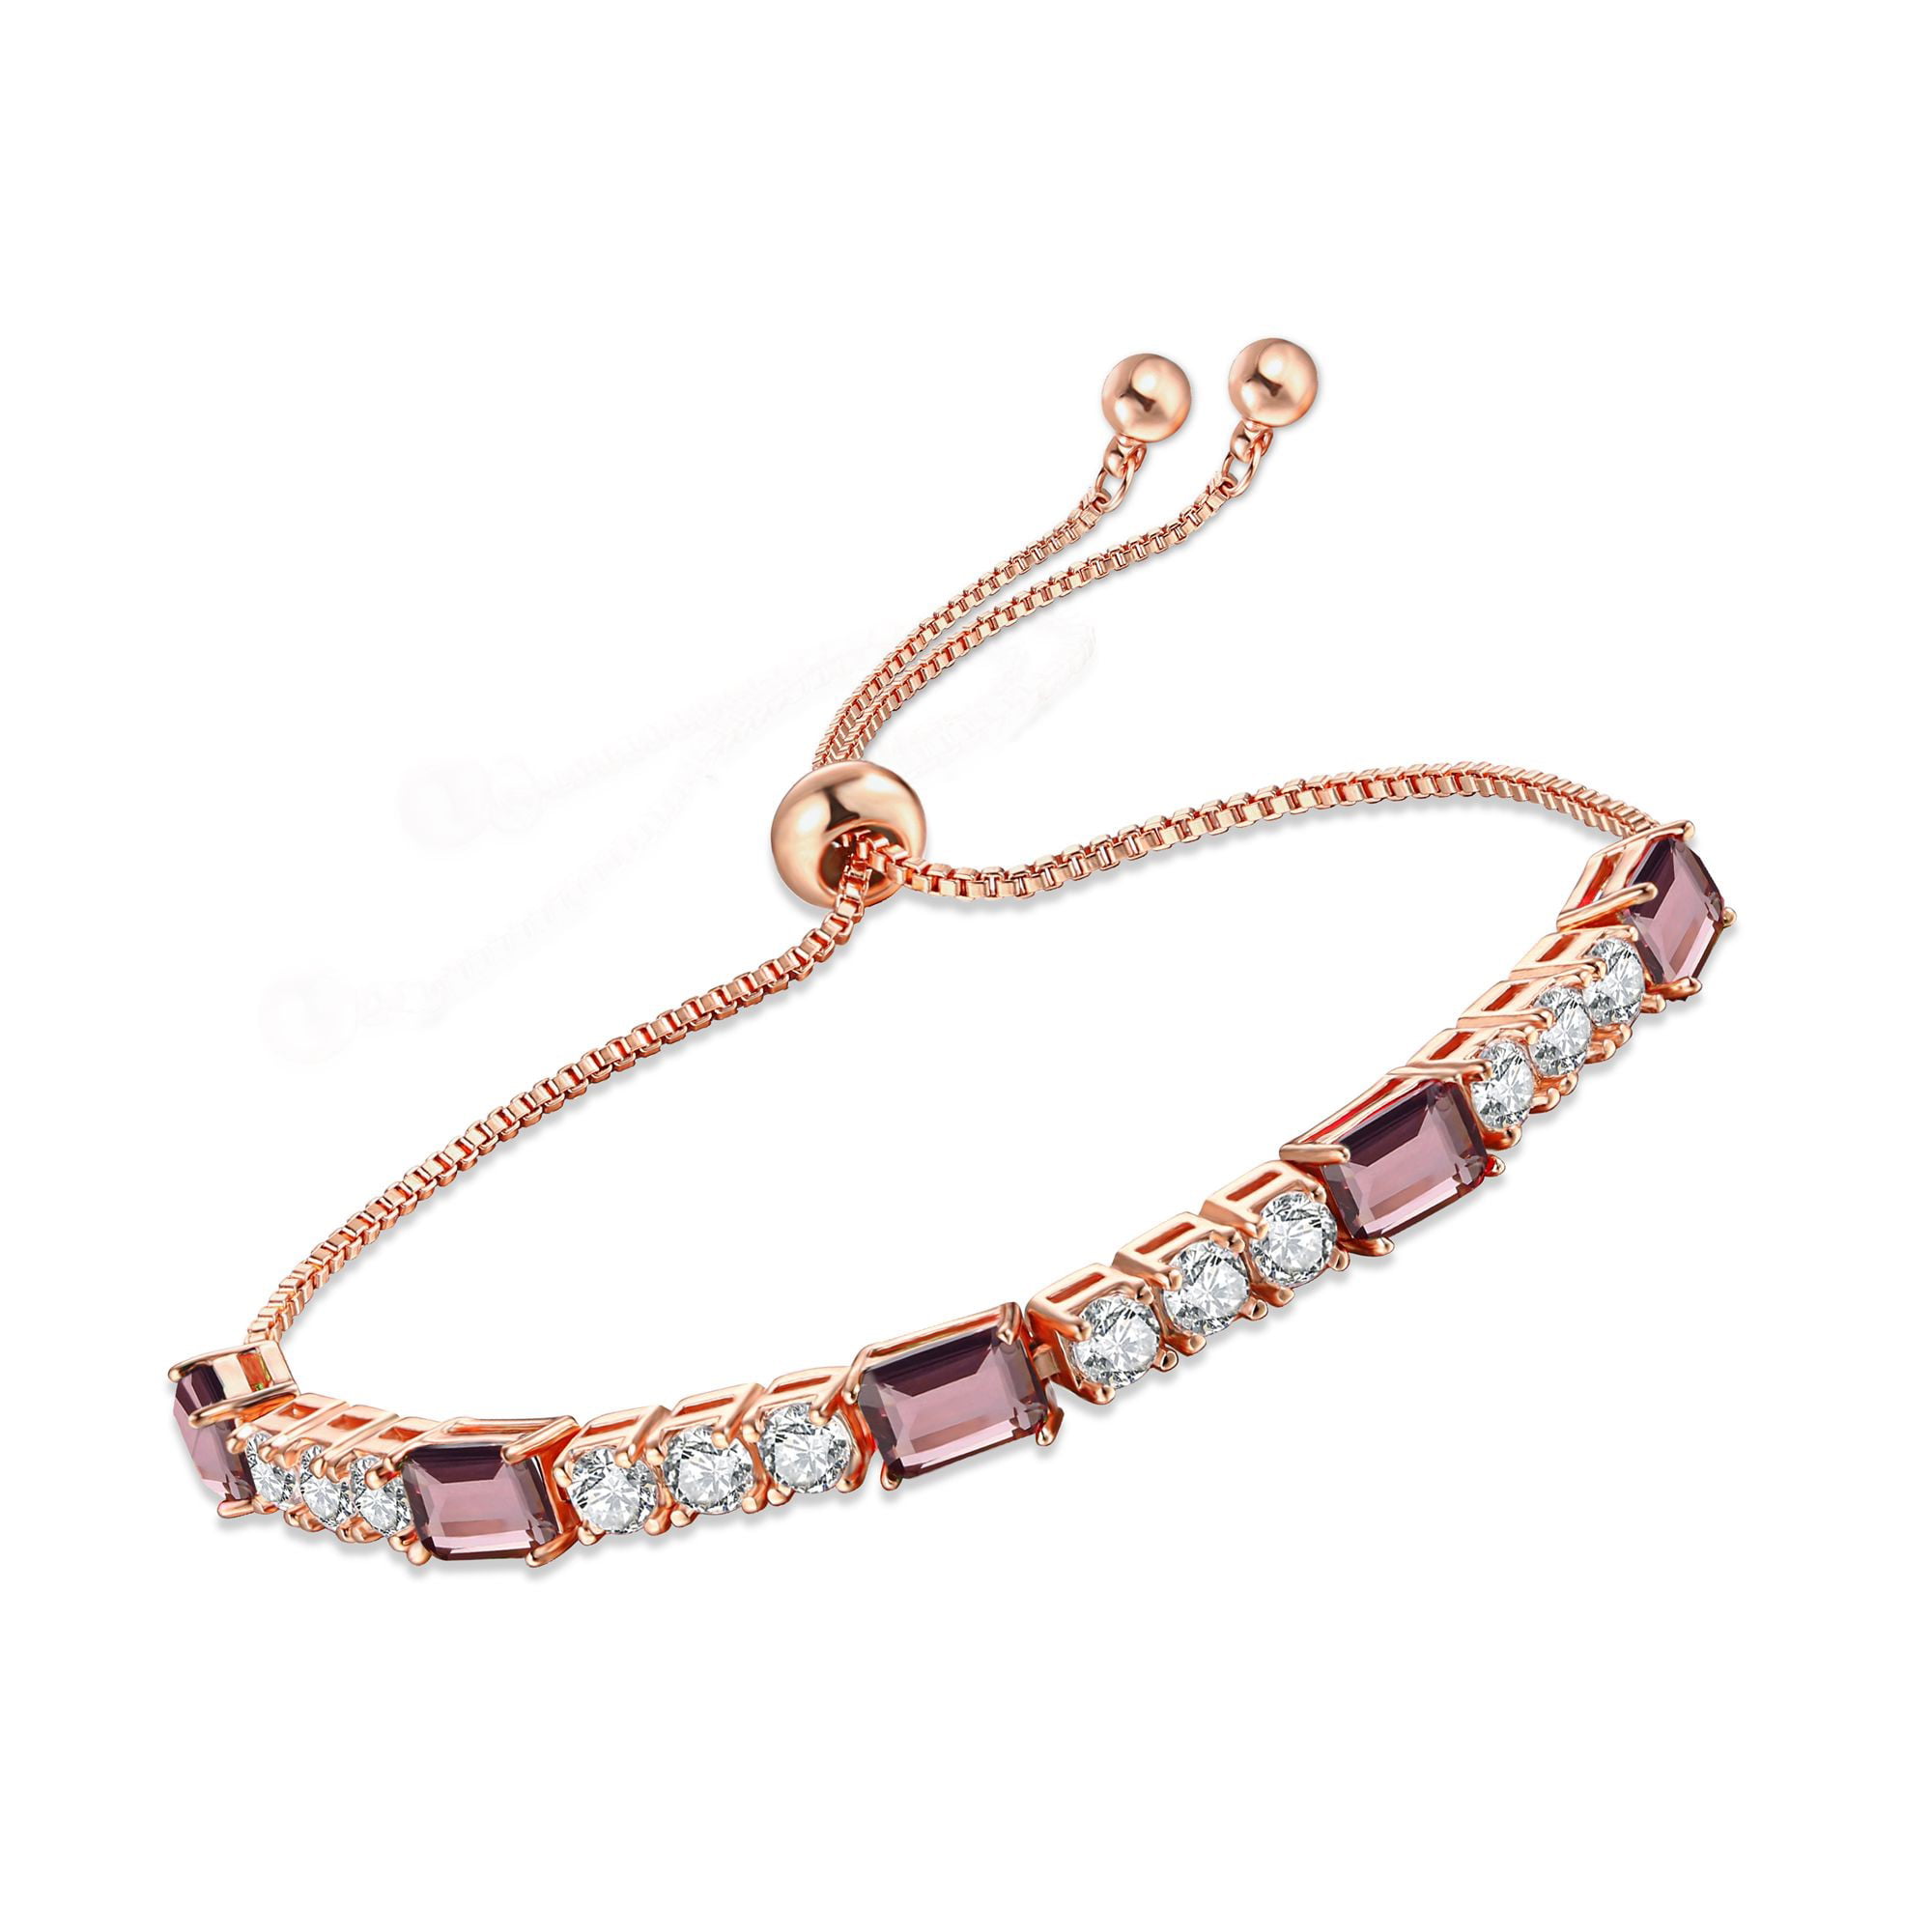 Tennis Bracelet gift for women 8mm Tourmaline Crystal White Gold plated Jewelry 